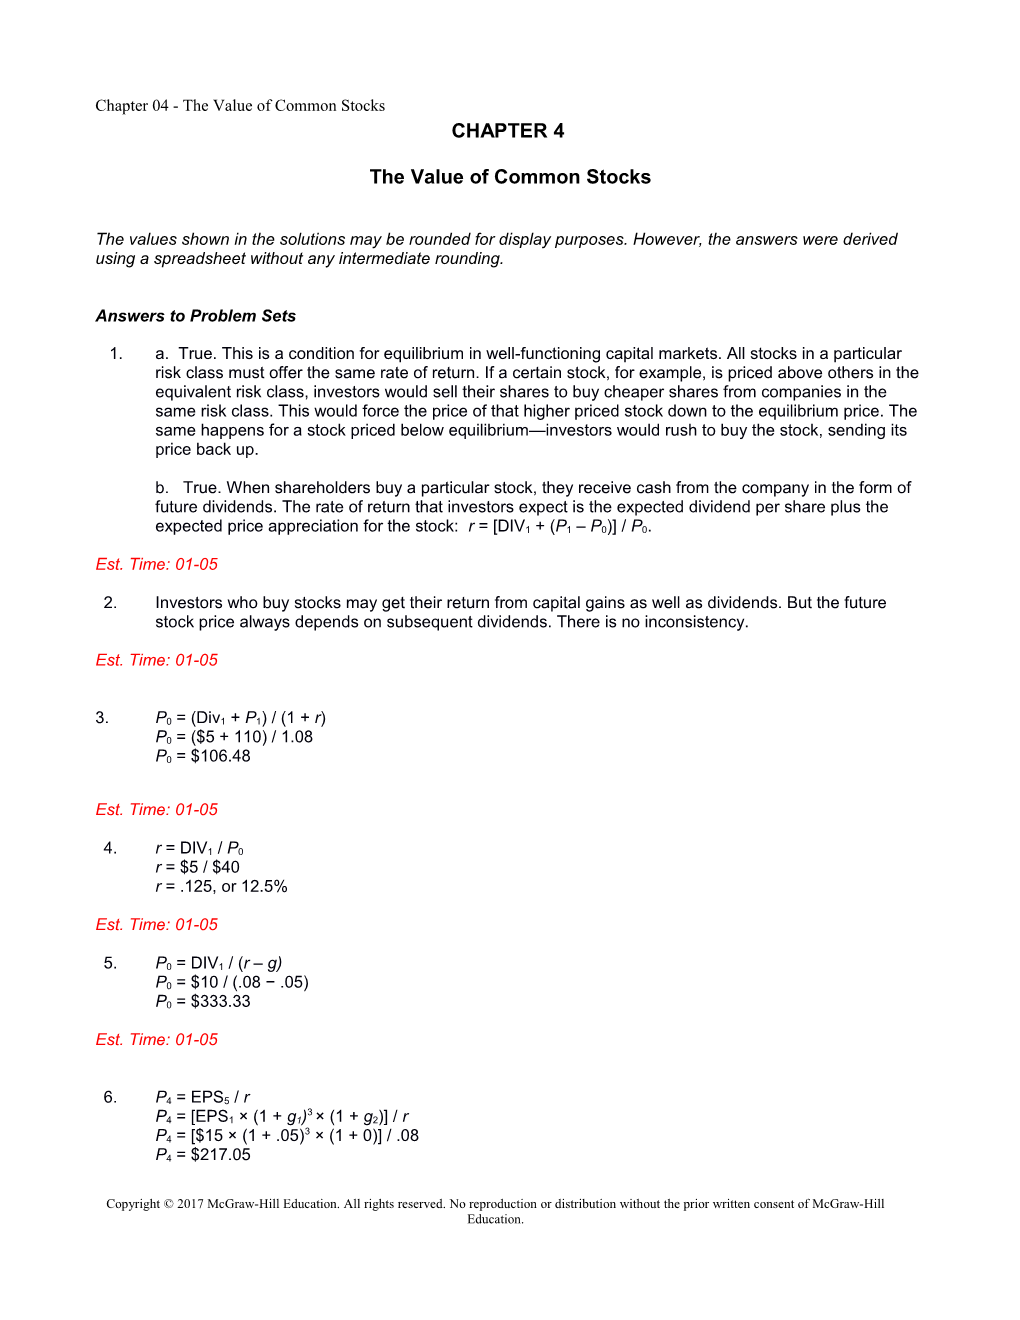 Chapter 04 - the Value of Common Stocks